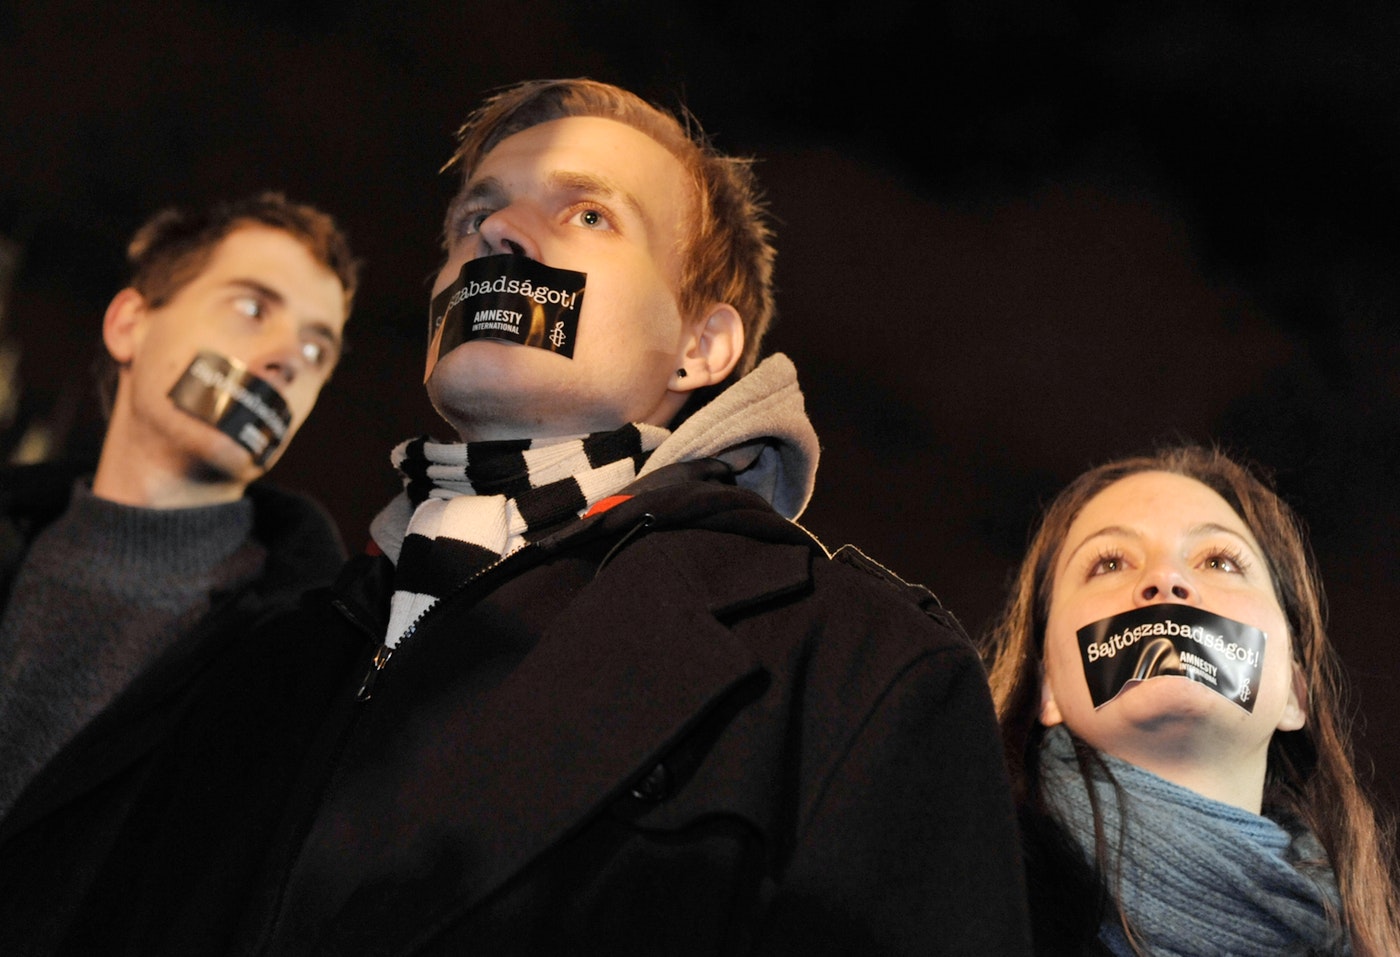 Hungarian Amnesty International activists protest with taped mouth during a demonstration against the government’s new media law in Budapest in 2011. The message, in Hungarian, reads “We want press freedom!” (AP/Bela Szandelszky)